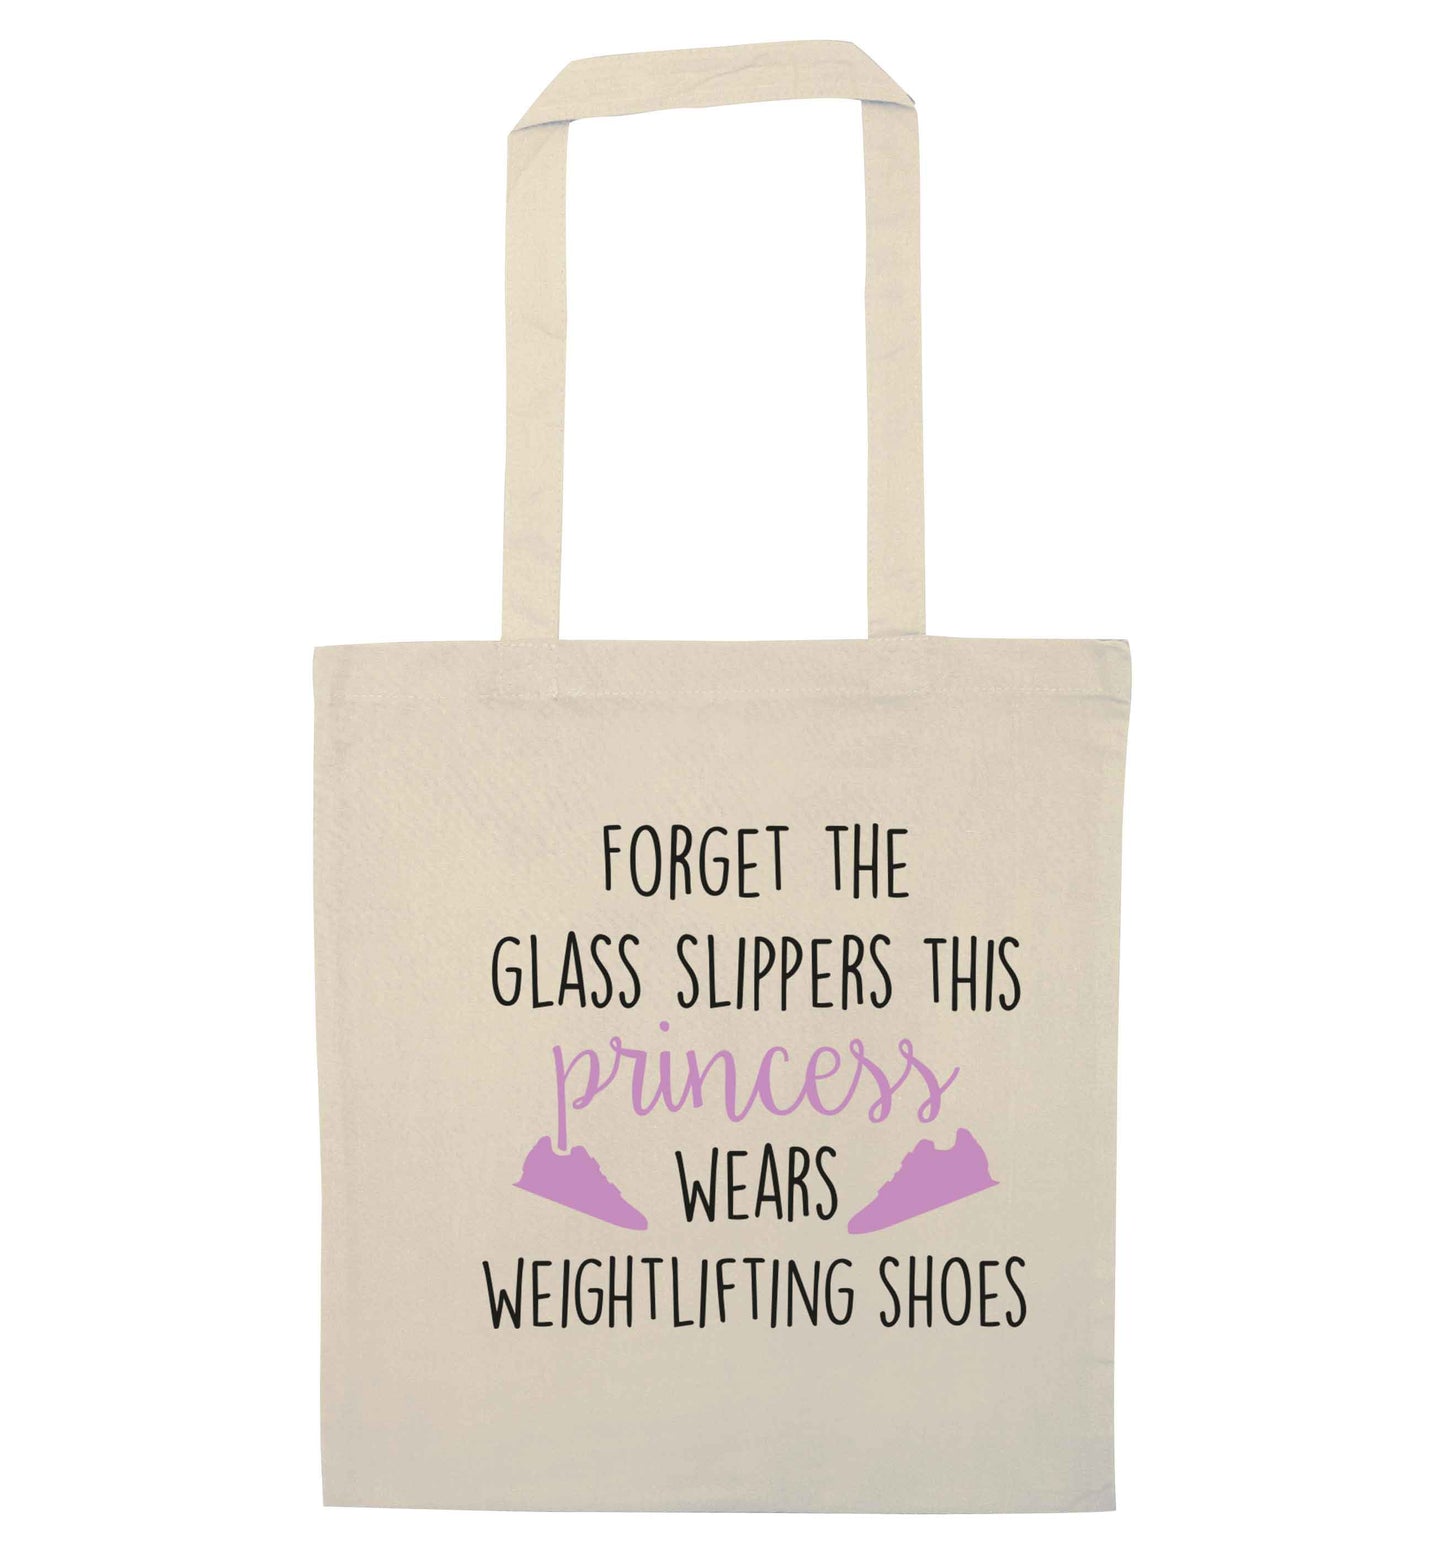 Forget the glass slippers this princess wears weightlifting shoes natural tote bag